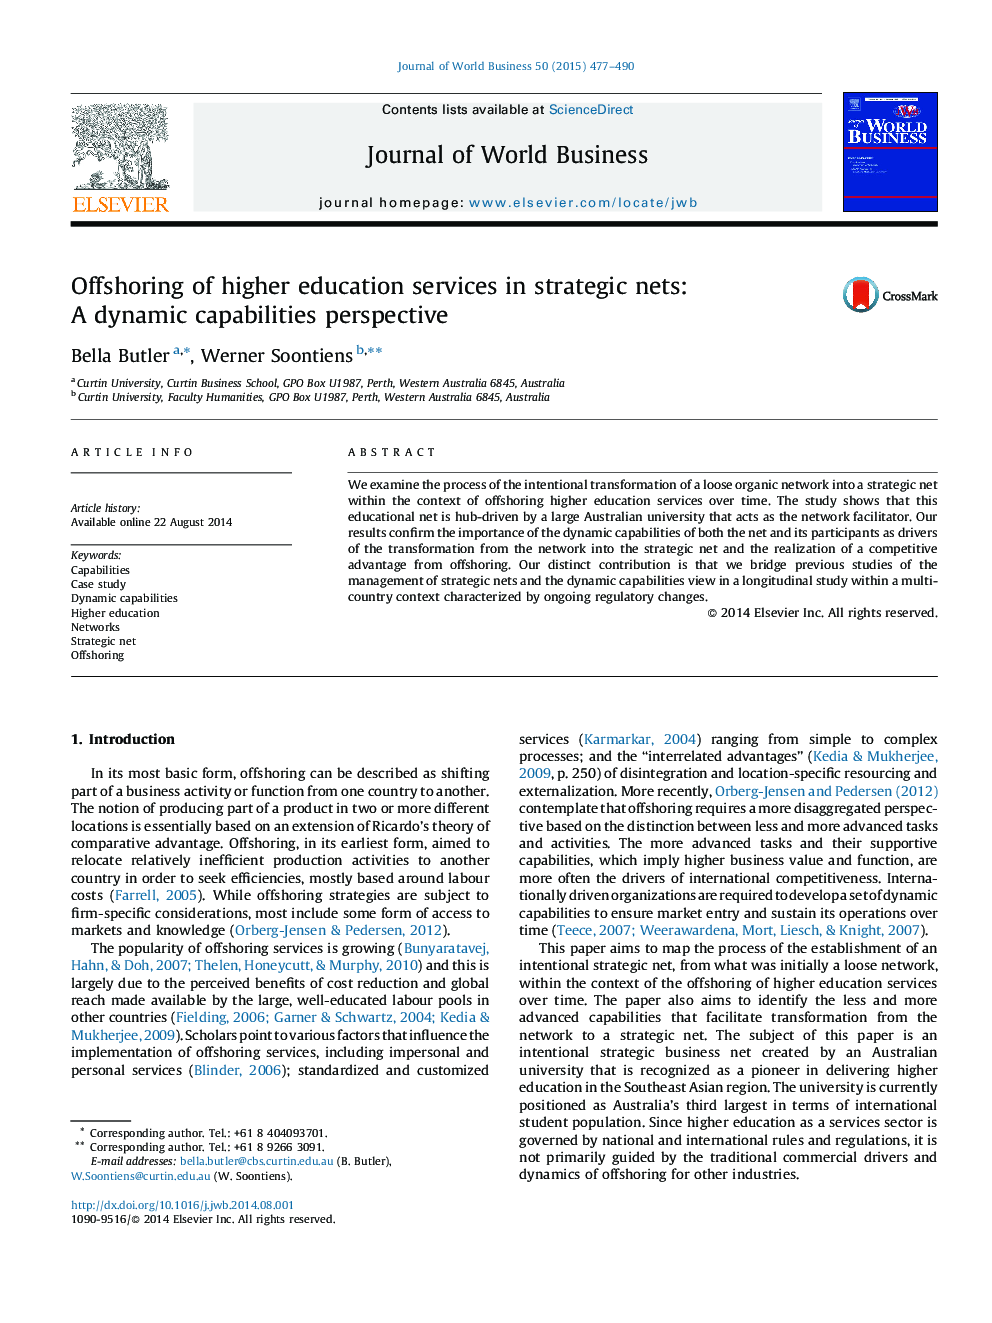 Offshoring of higher education services in strategic nets: A dynamic capabilities perspective